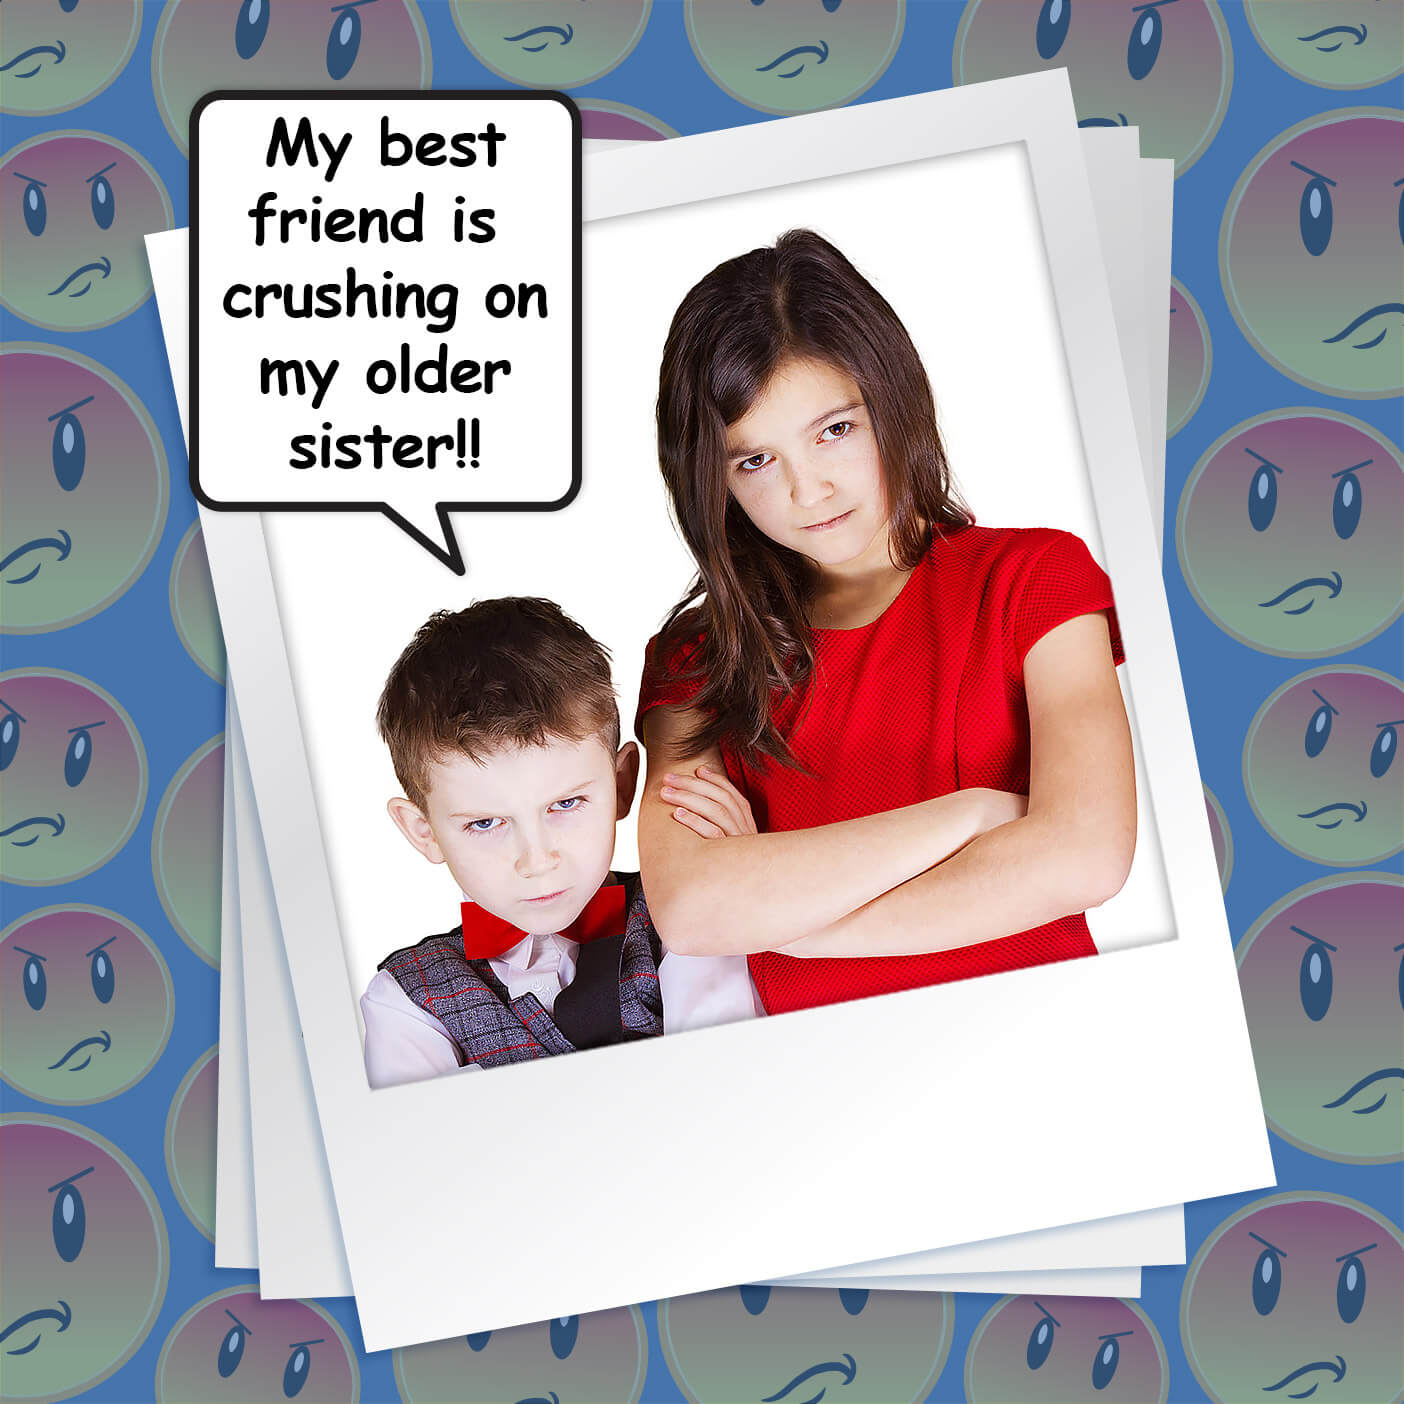 amanda roblin recommends Crush On My Sister